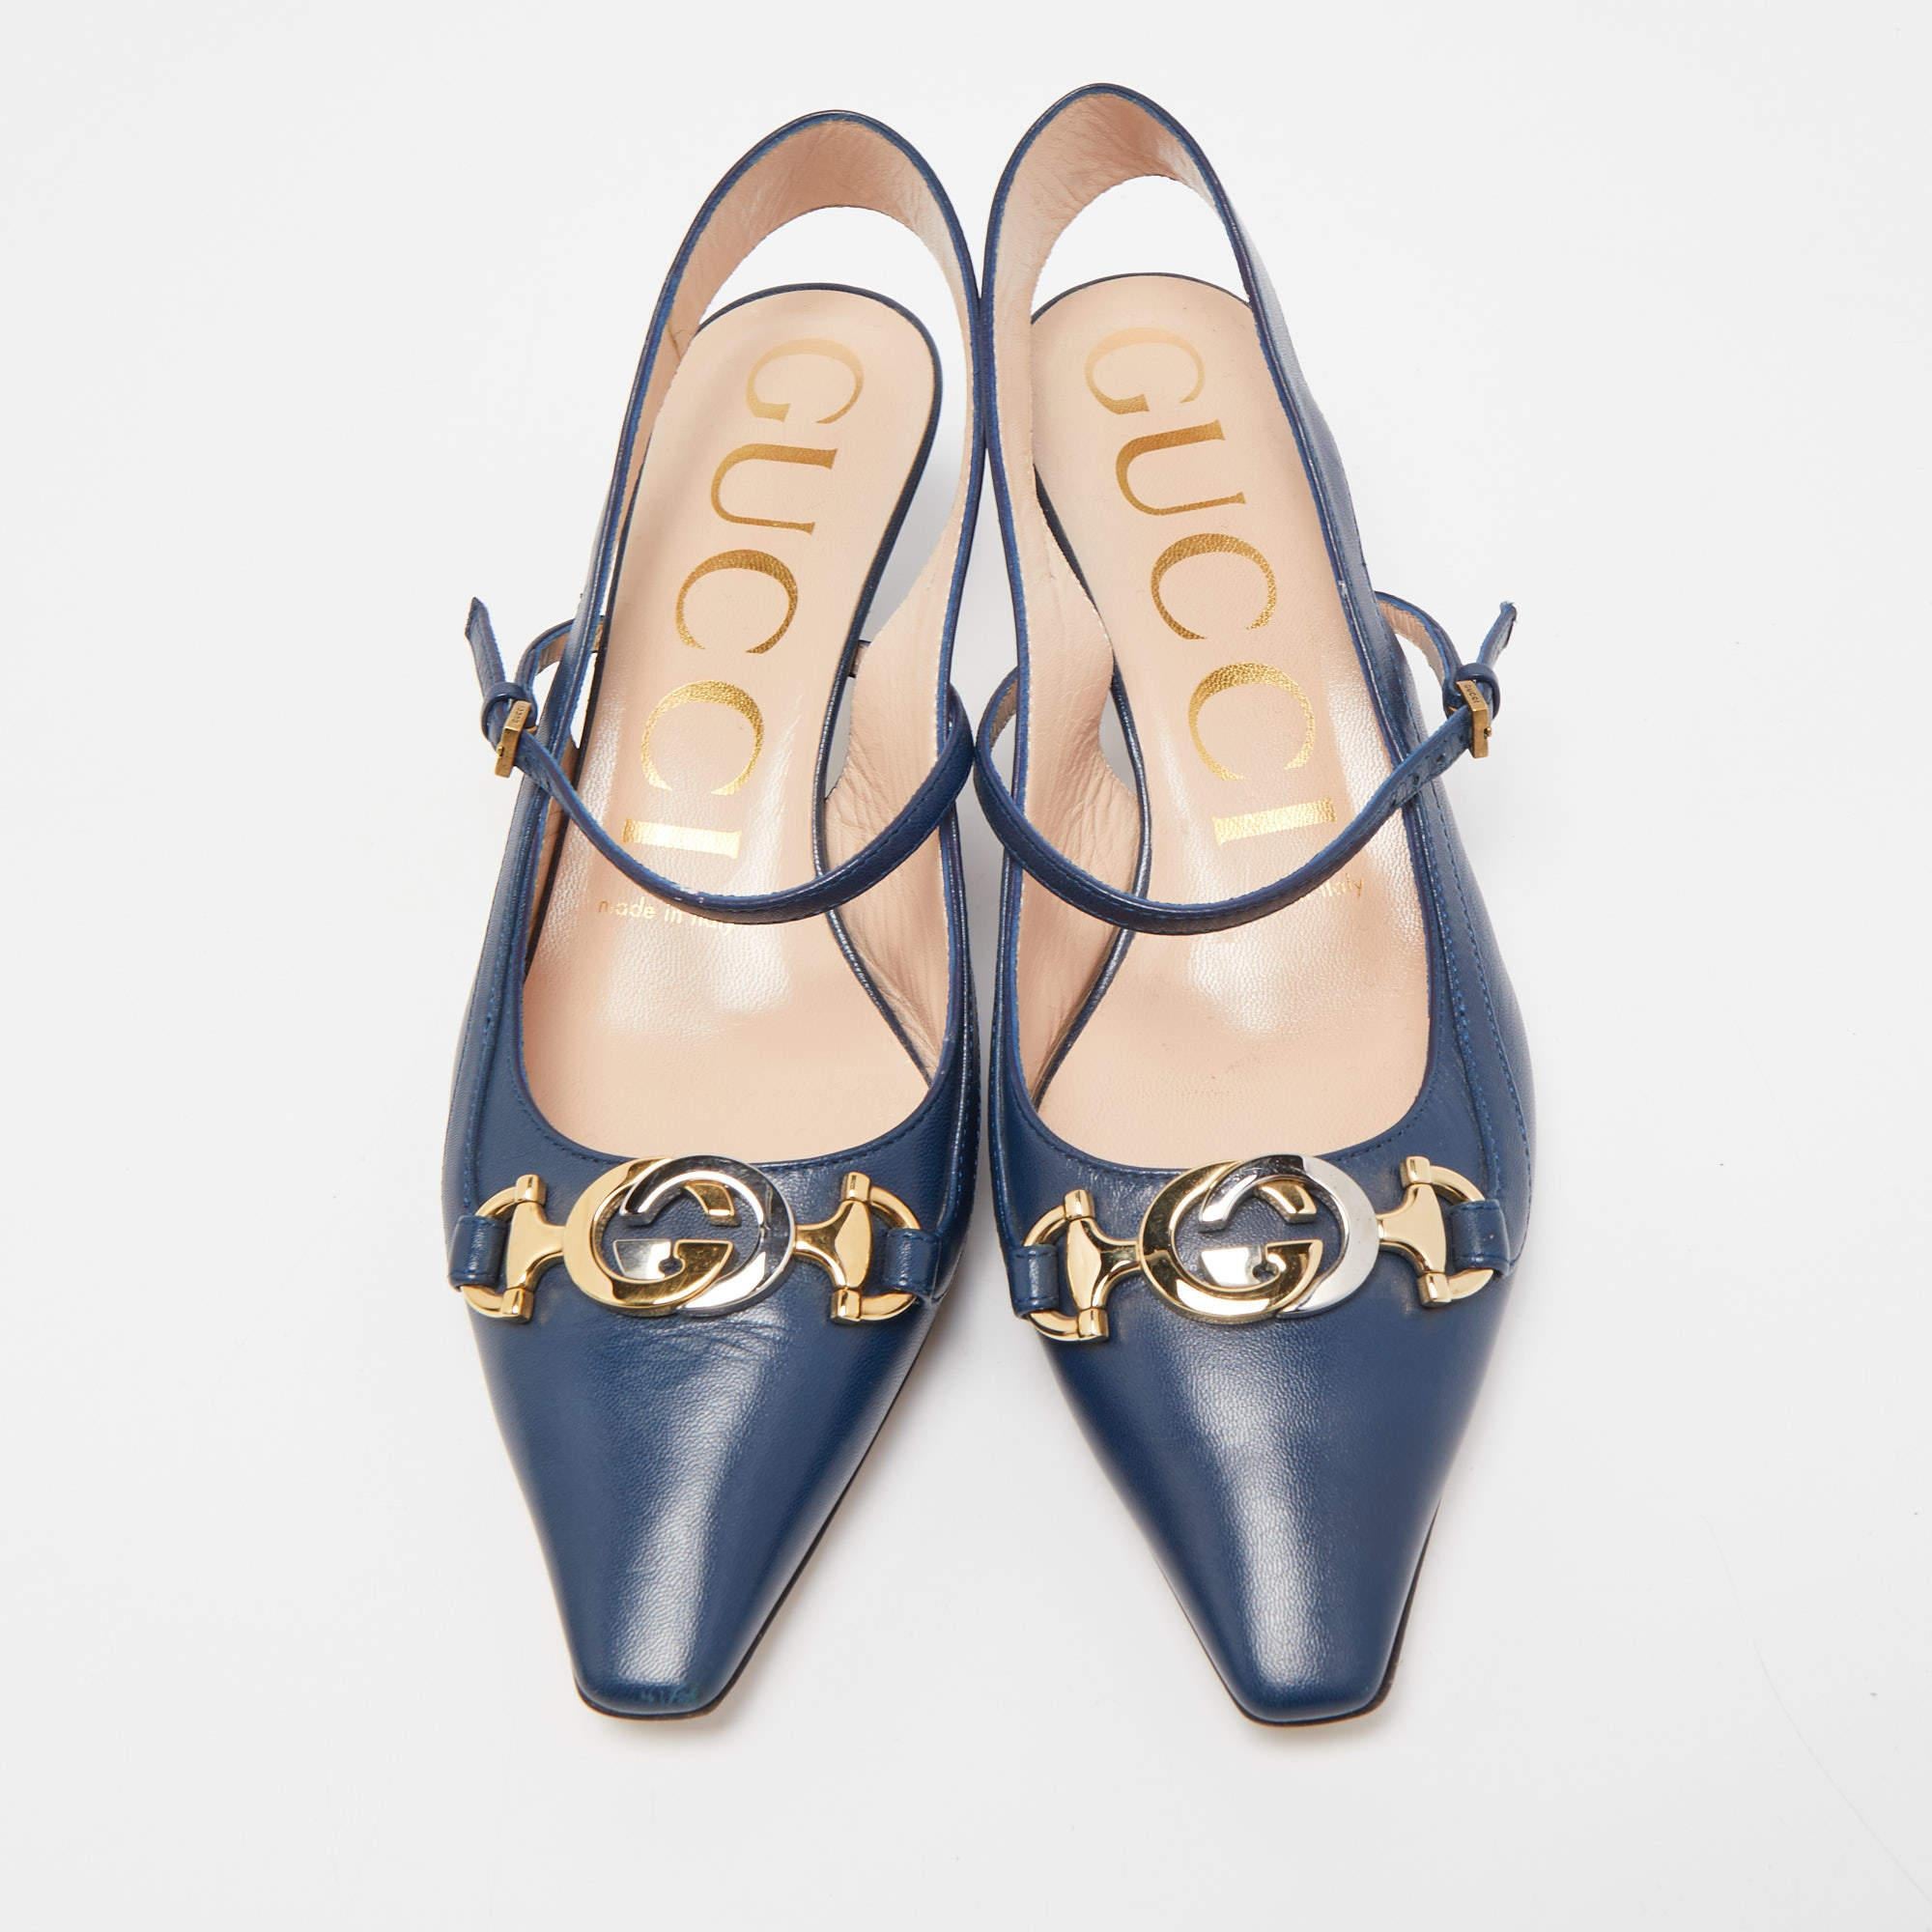 Wonderfully-crafted shoes added with notable elements to fit well and pair perfectly with all your plans. Make these Gucci Zumi pumps yours today!

